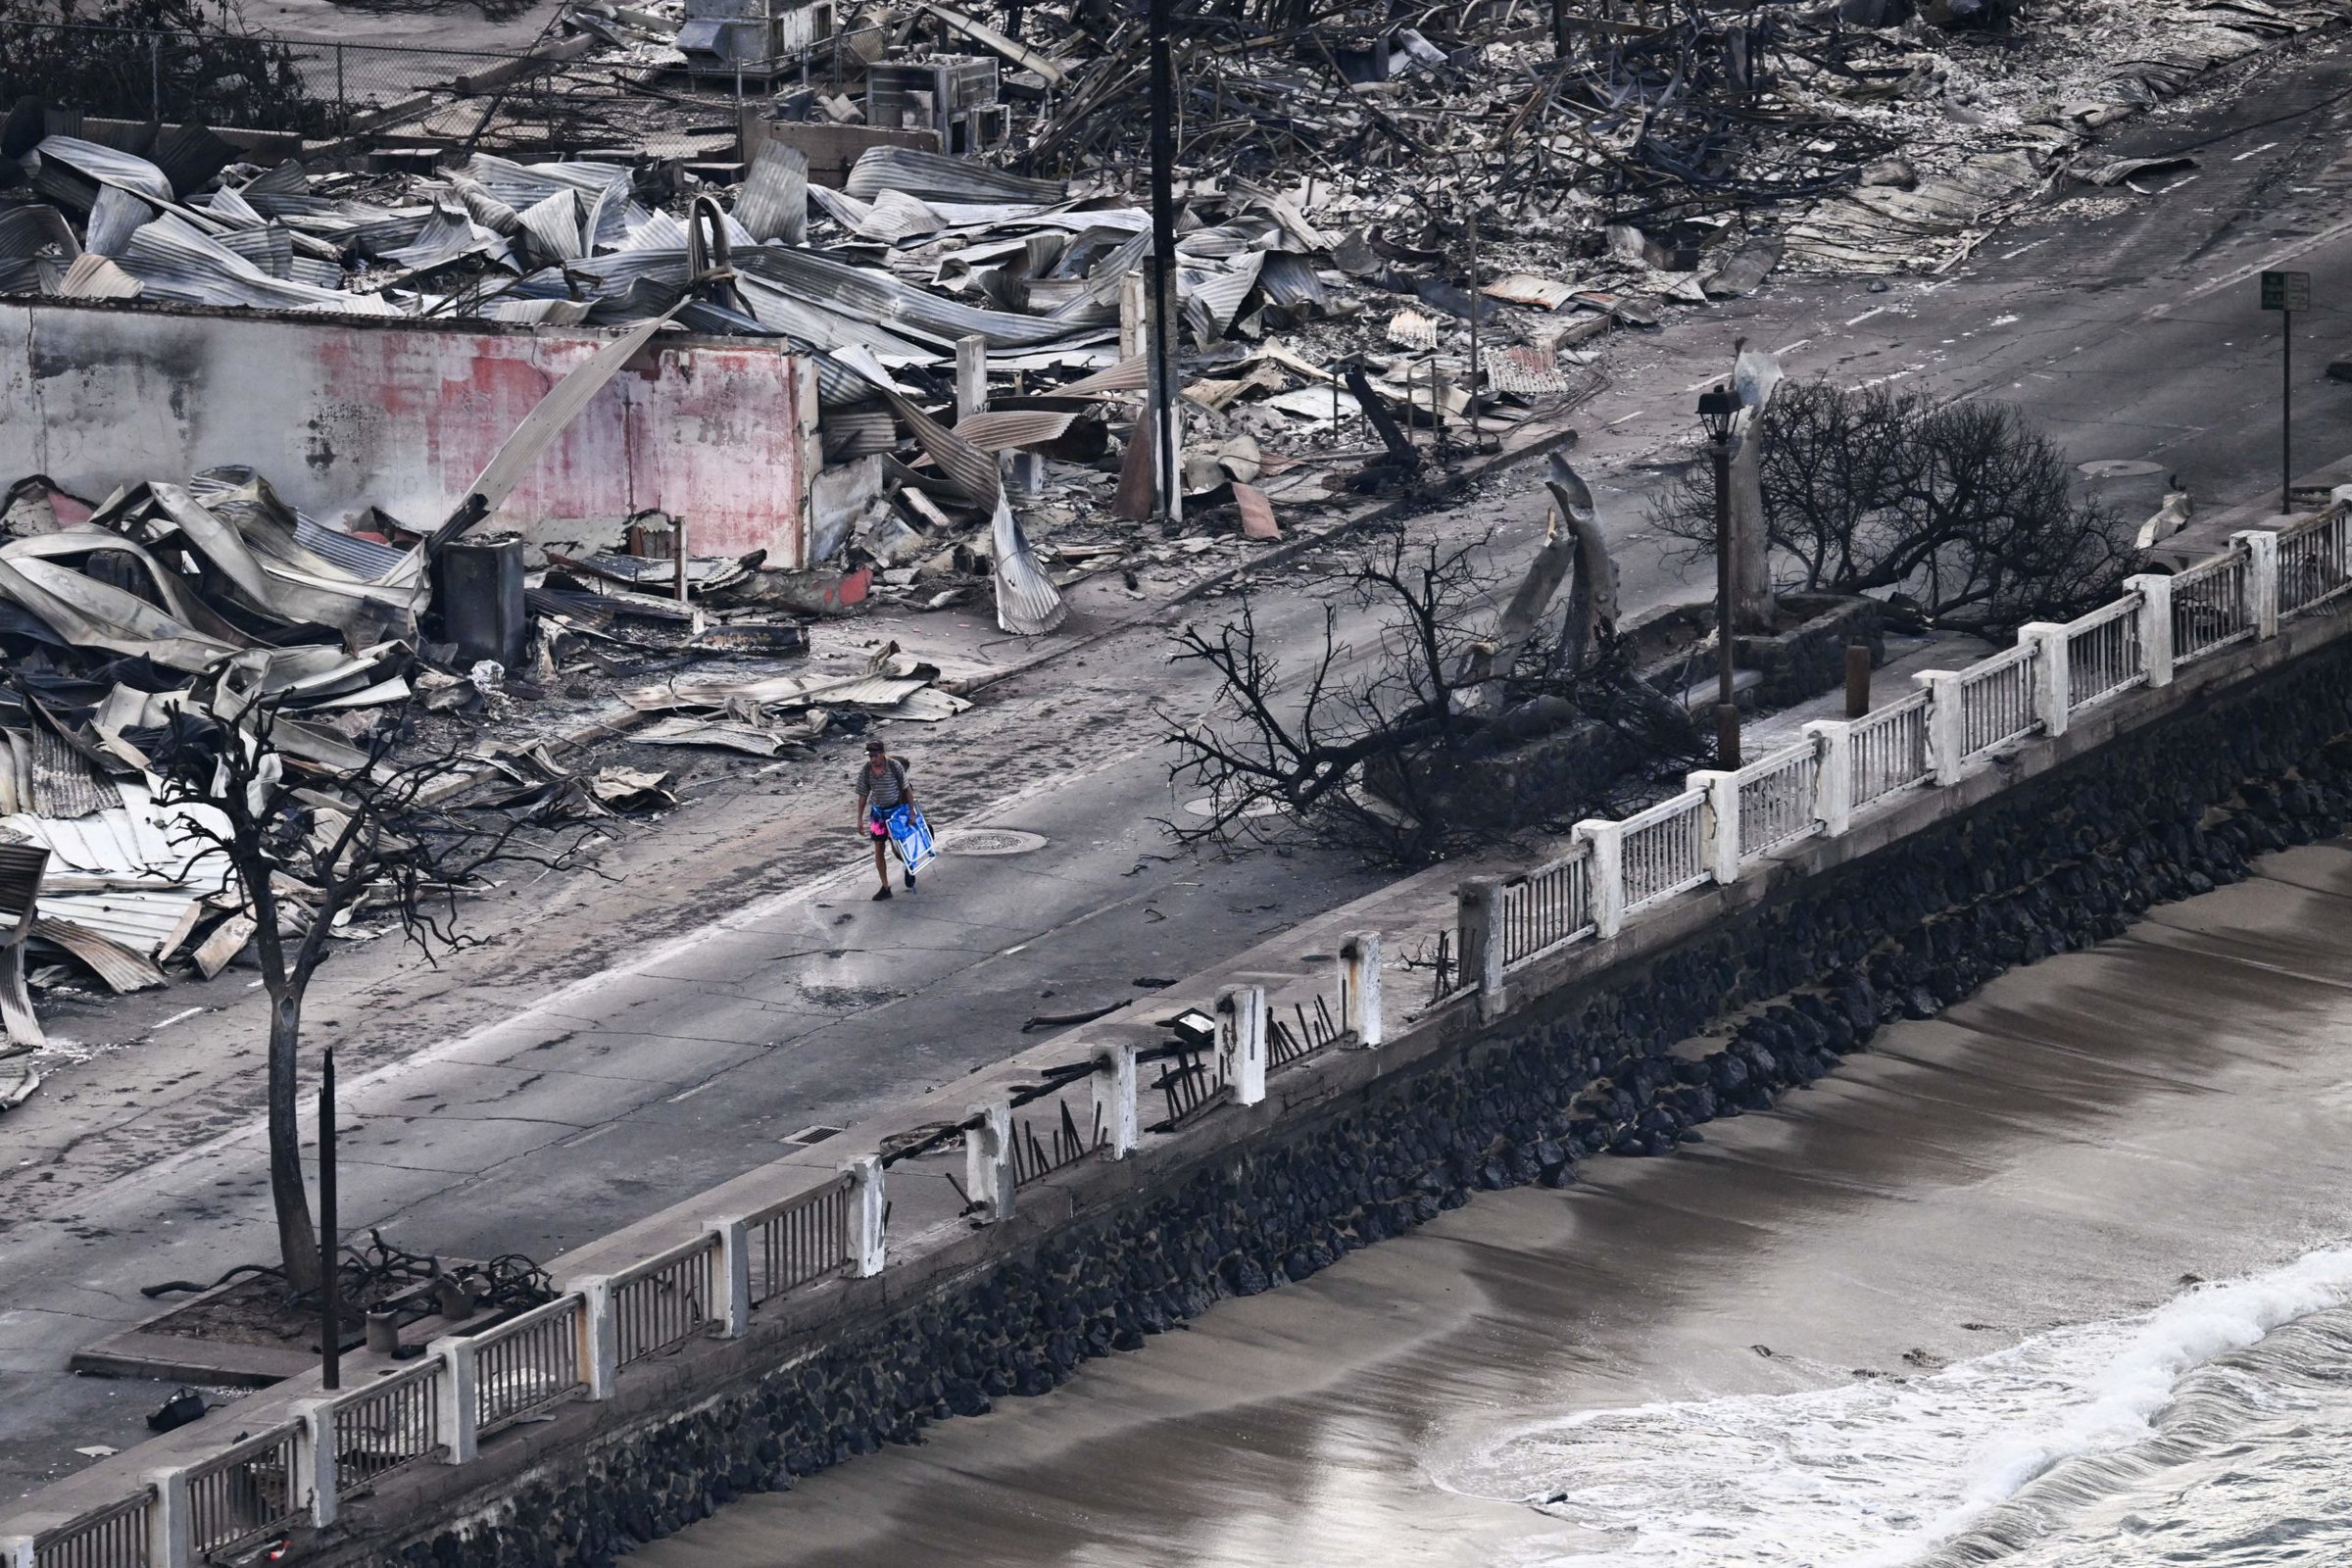 An aerial image taken on August 10, 2023 shows a person walking down Front Street past destroyed buildings burned to the ground in Lahaina in the aftermath of wildfires in western Maui, Hawaii. At least 36 people have died after a fast-moving wildfire turned Lahaina to ashes, officials said August 9, 2023 as visitors asked to leave the island of Maui found themselves stranded at the airport. The fires began burning early August 8, scorching thousands of acres and putting homes, businesses and 35,000 lives at risk on Maui, the Hawaii Emergency Management Agency said in a statement. (Photo by Patrick T. Fallon / AFP) (Photo by PATRICK T. FALLON/AFP via Getty Images)